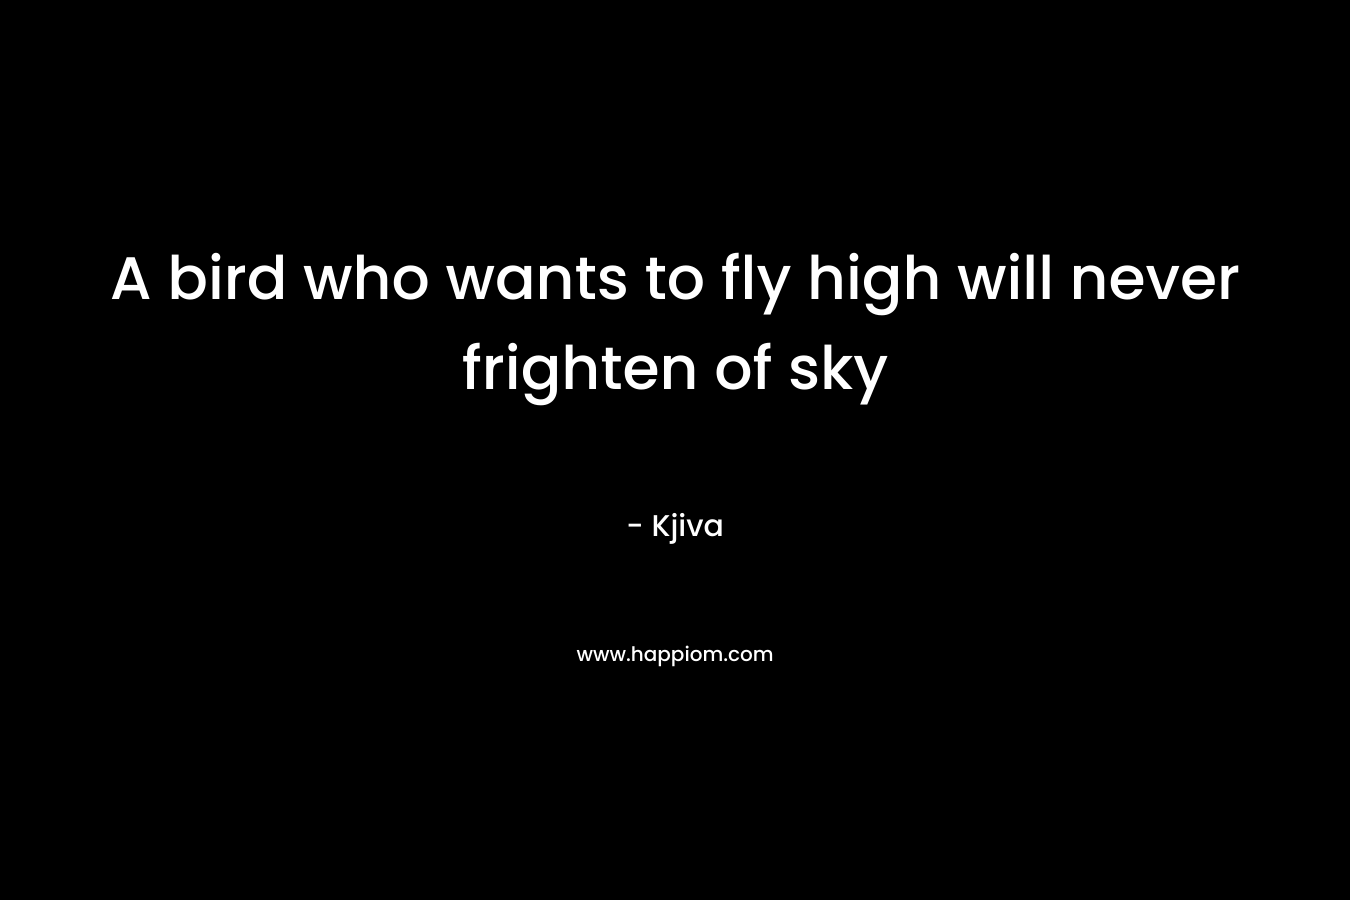 A bird who wants to fly high will never frighten of sky